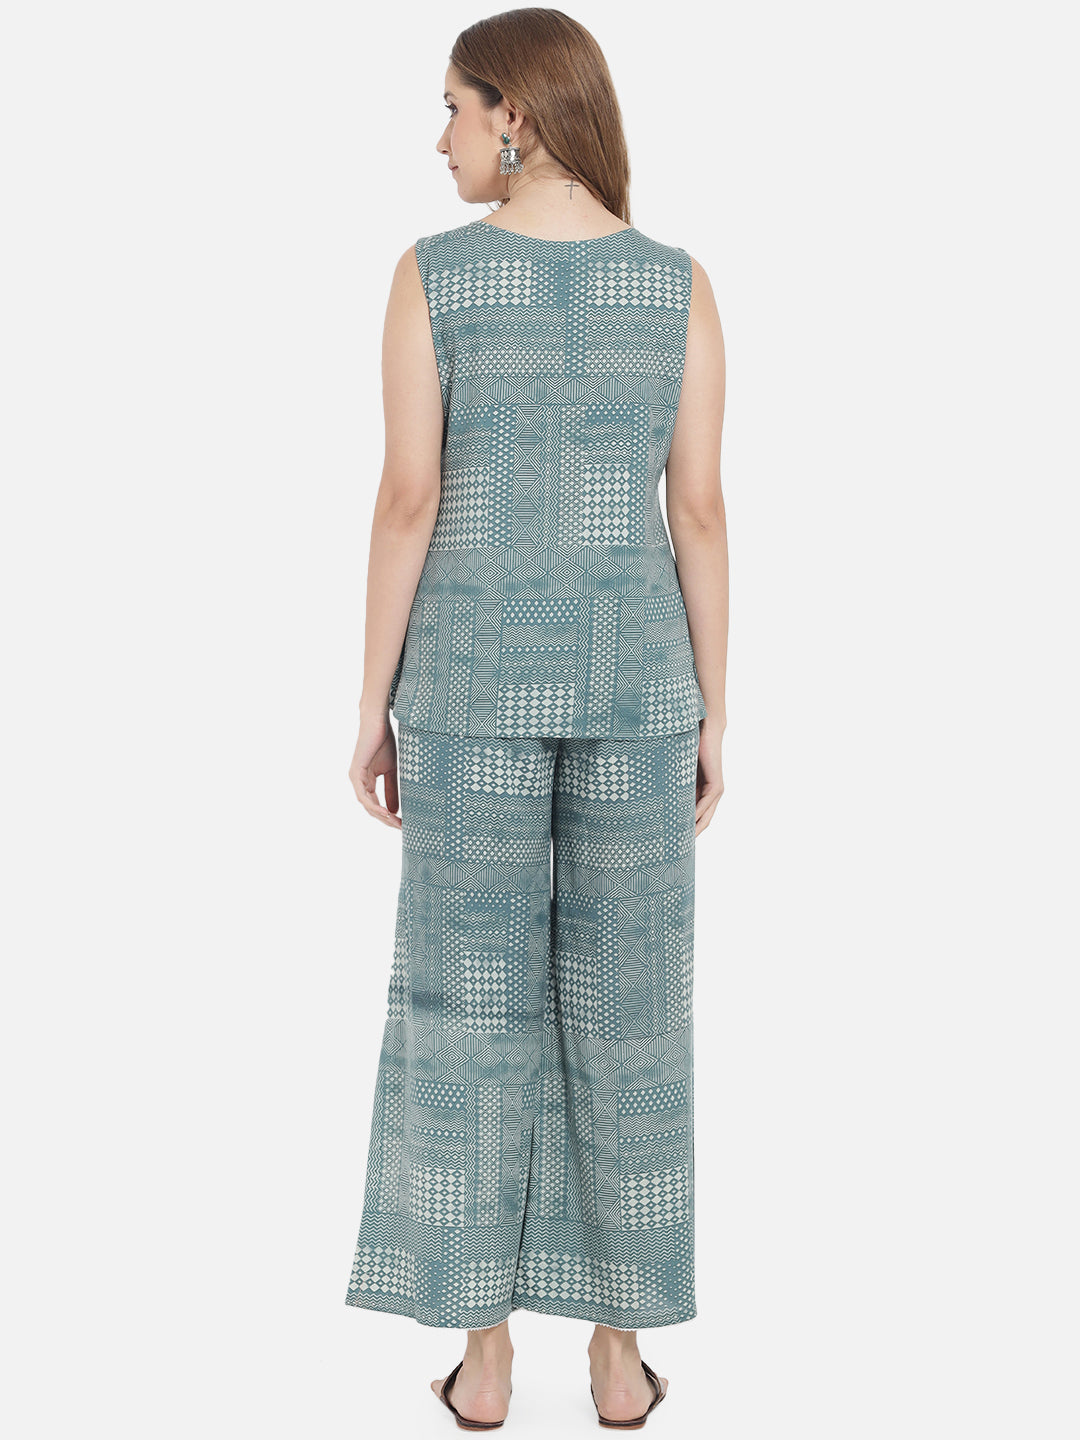 Women's Green & White Abstract Printed Co-Ords With Shrug - Meeranshi